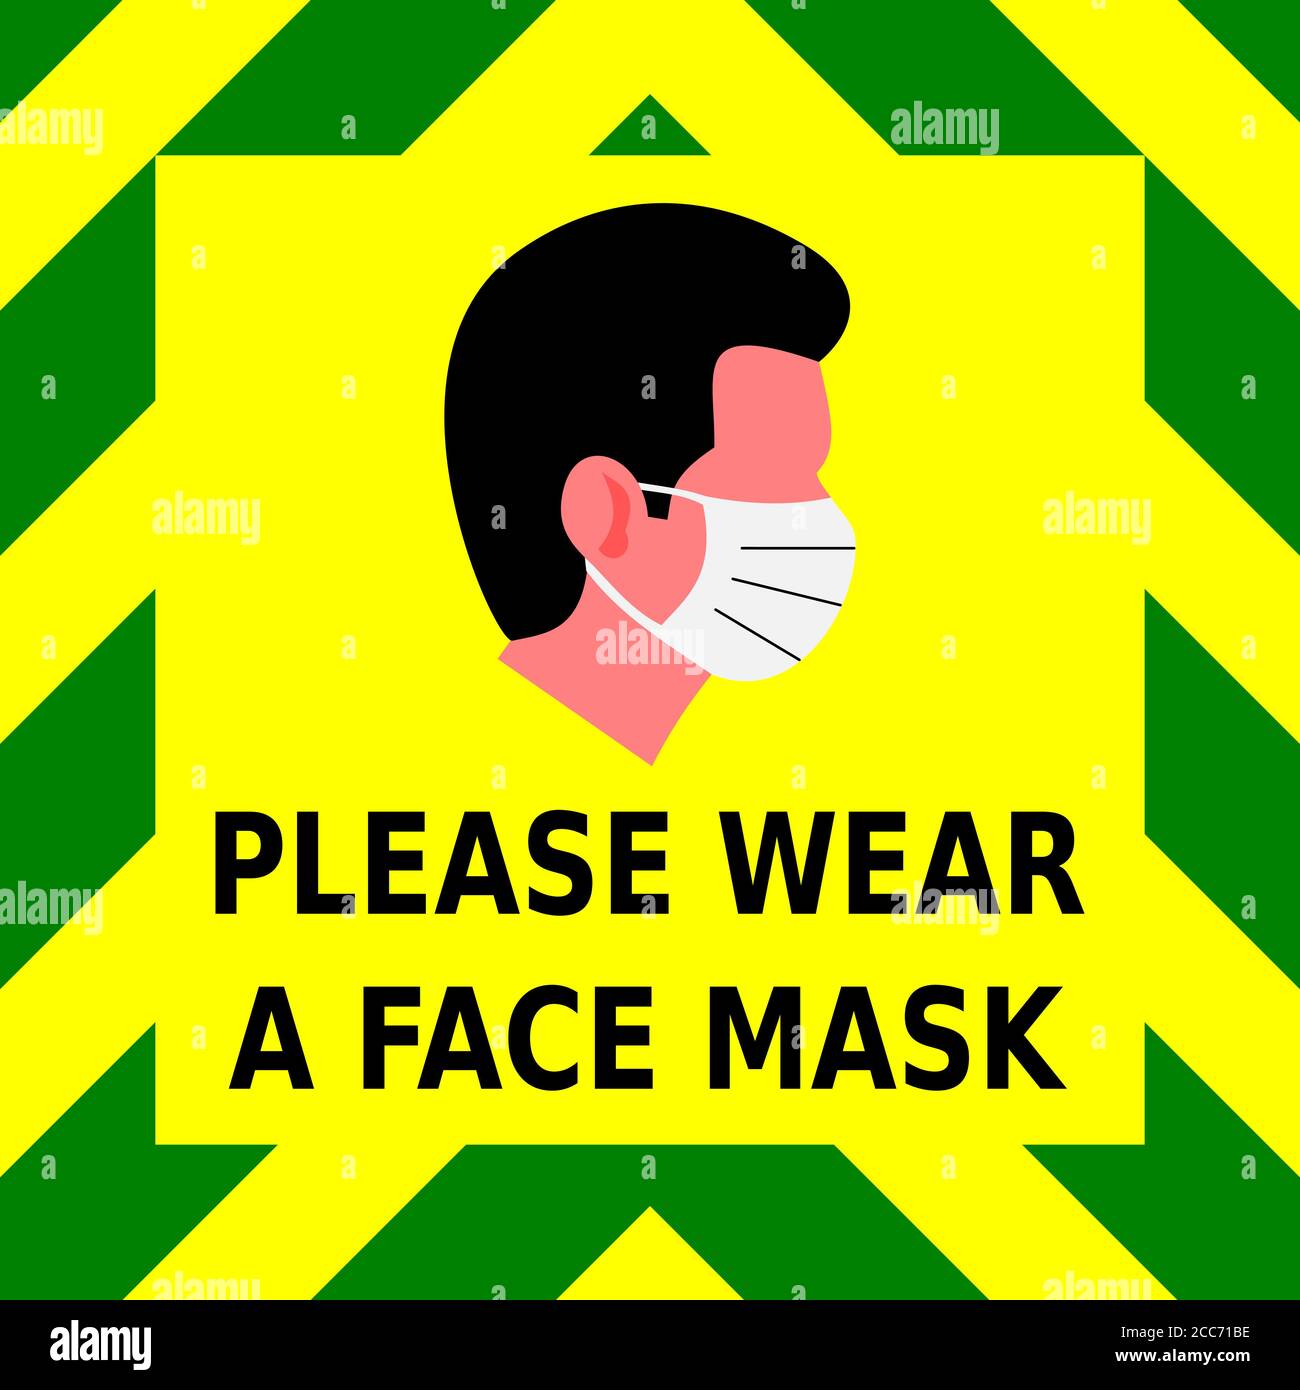 Vector graphic sign of green and yellow chevrons with a man wearing a face mask and the request to please wear a mask before entering. Stock Vector